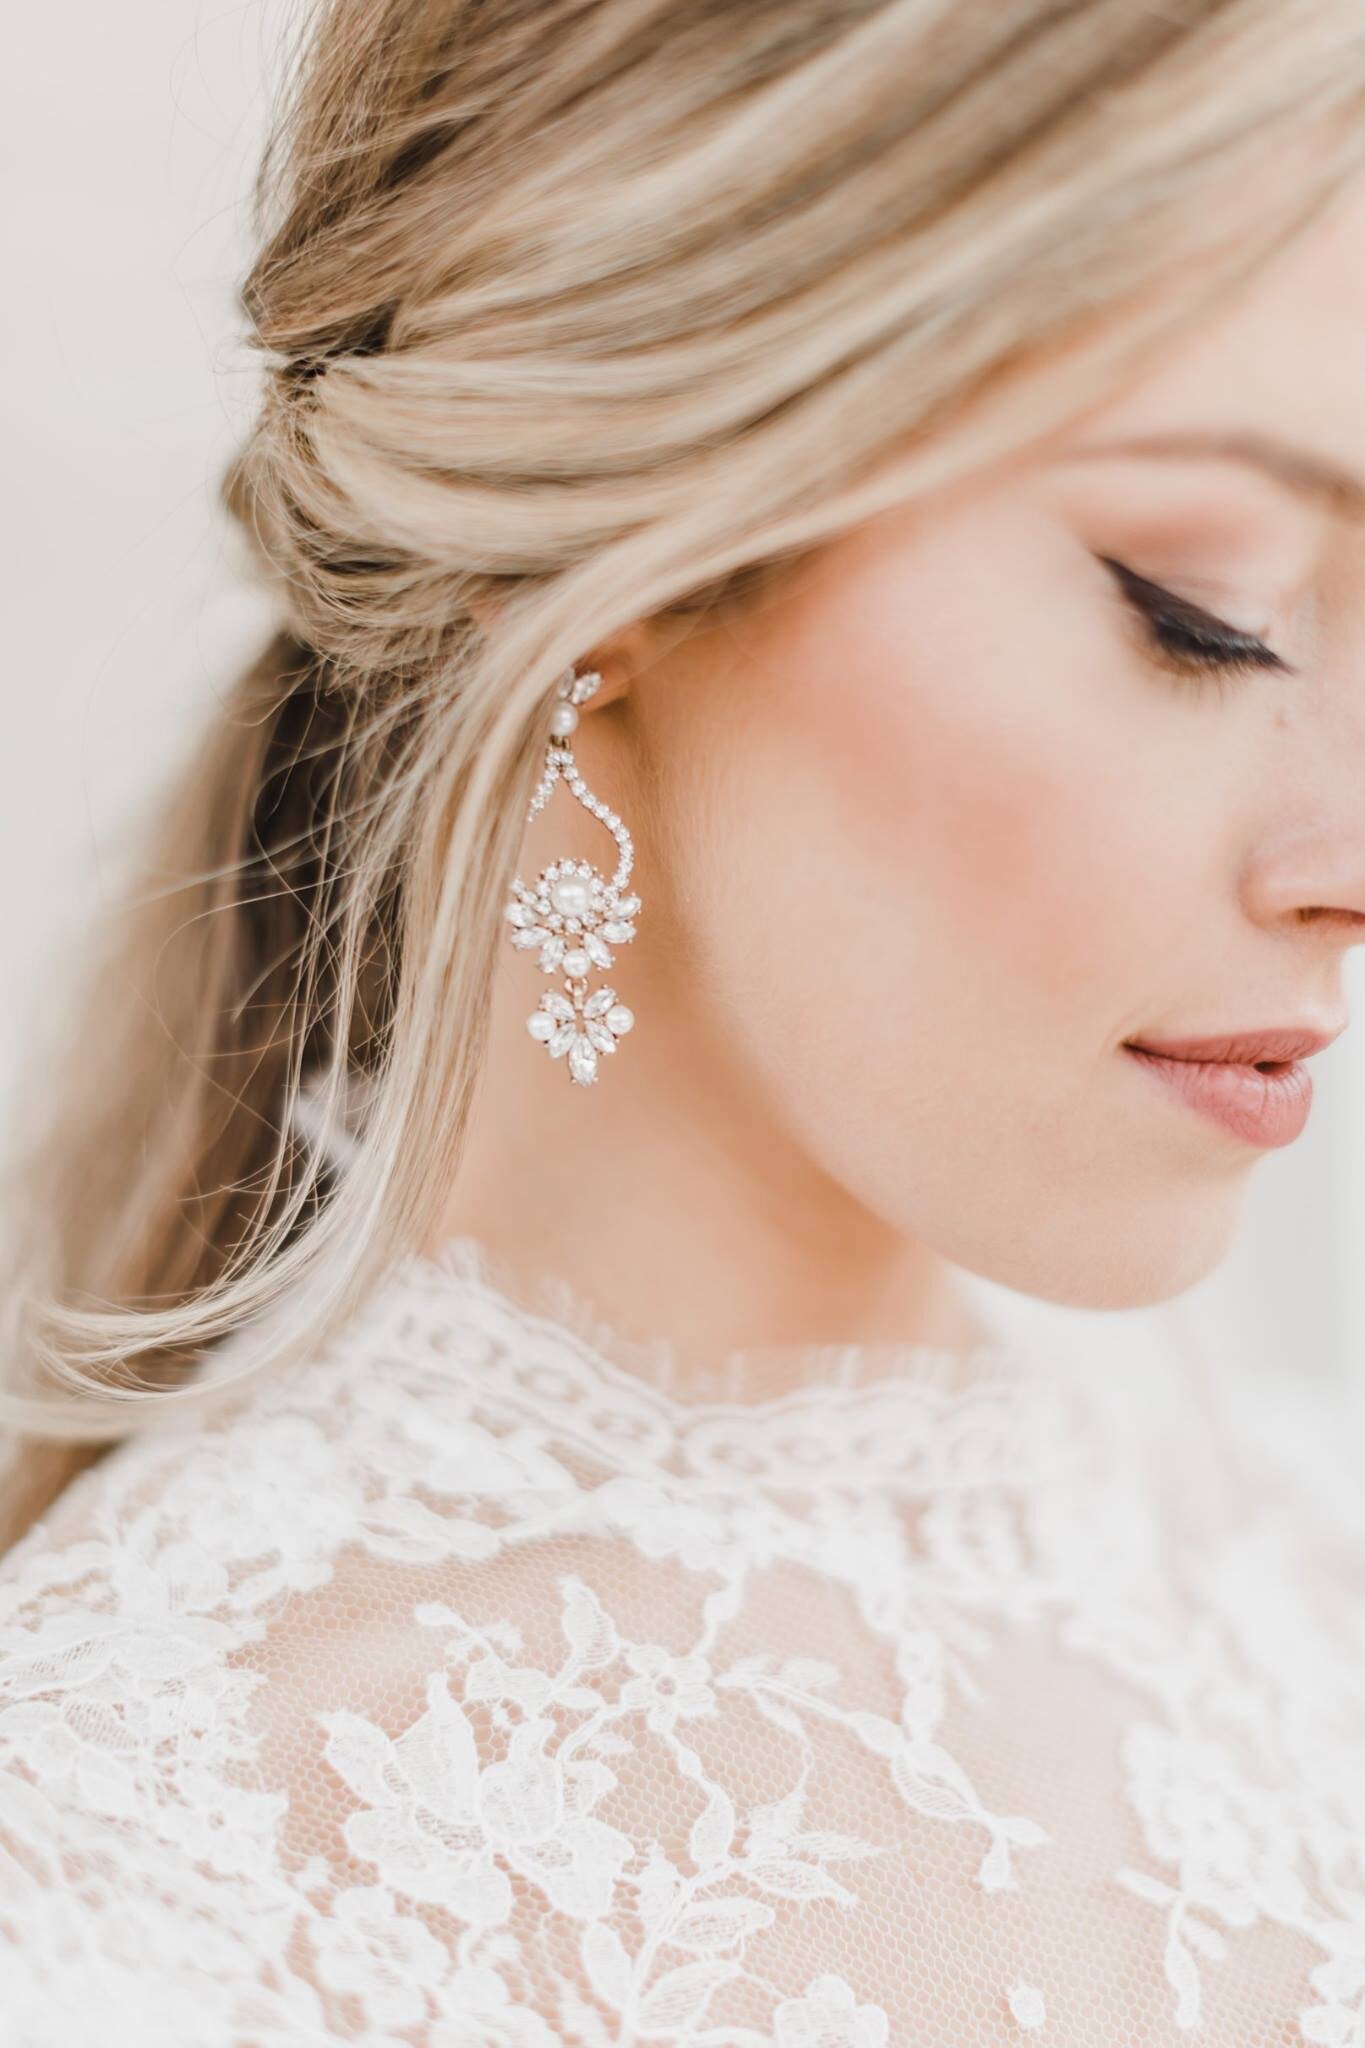 Closeup shot of bride with blond hair showing one side of her face, focusing in on her earrings and makeup